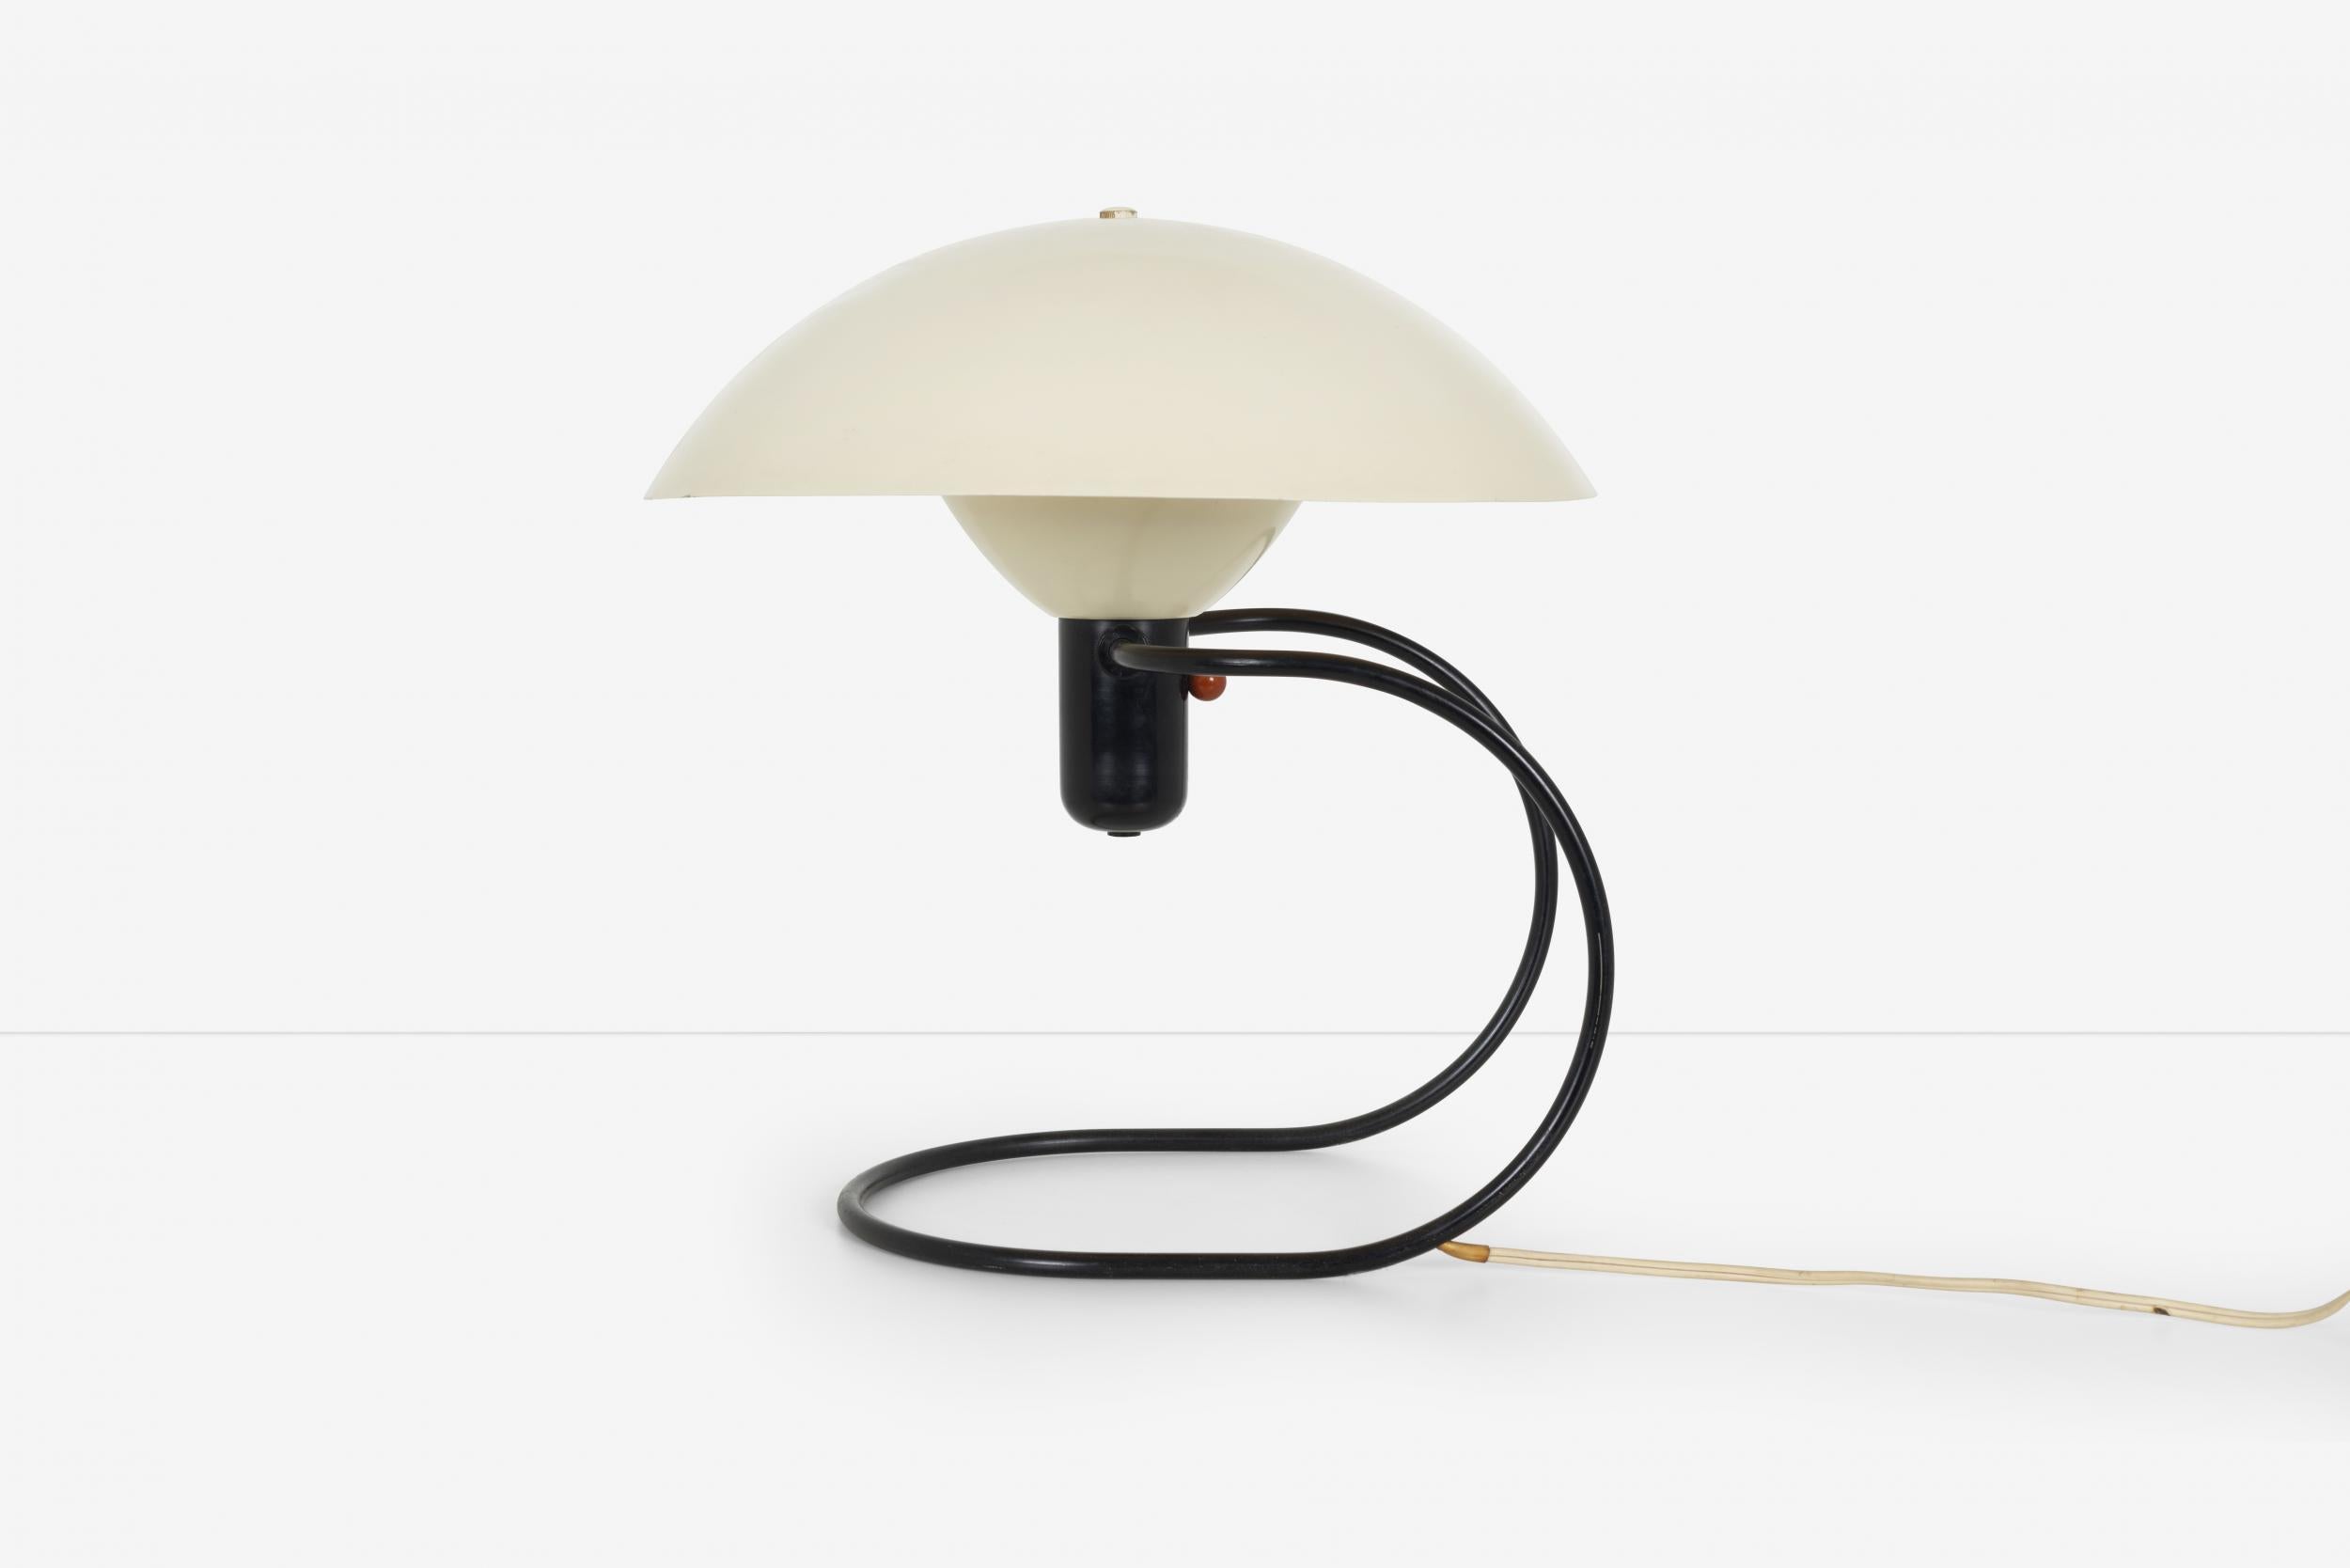 Greta von Nessen Anywhere Lamp Nessen Studio, Inc.
Anywhere as in hang on the wall or desk/table top
1952 enameled metal, plastic.